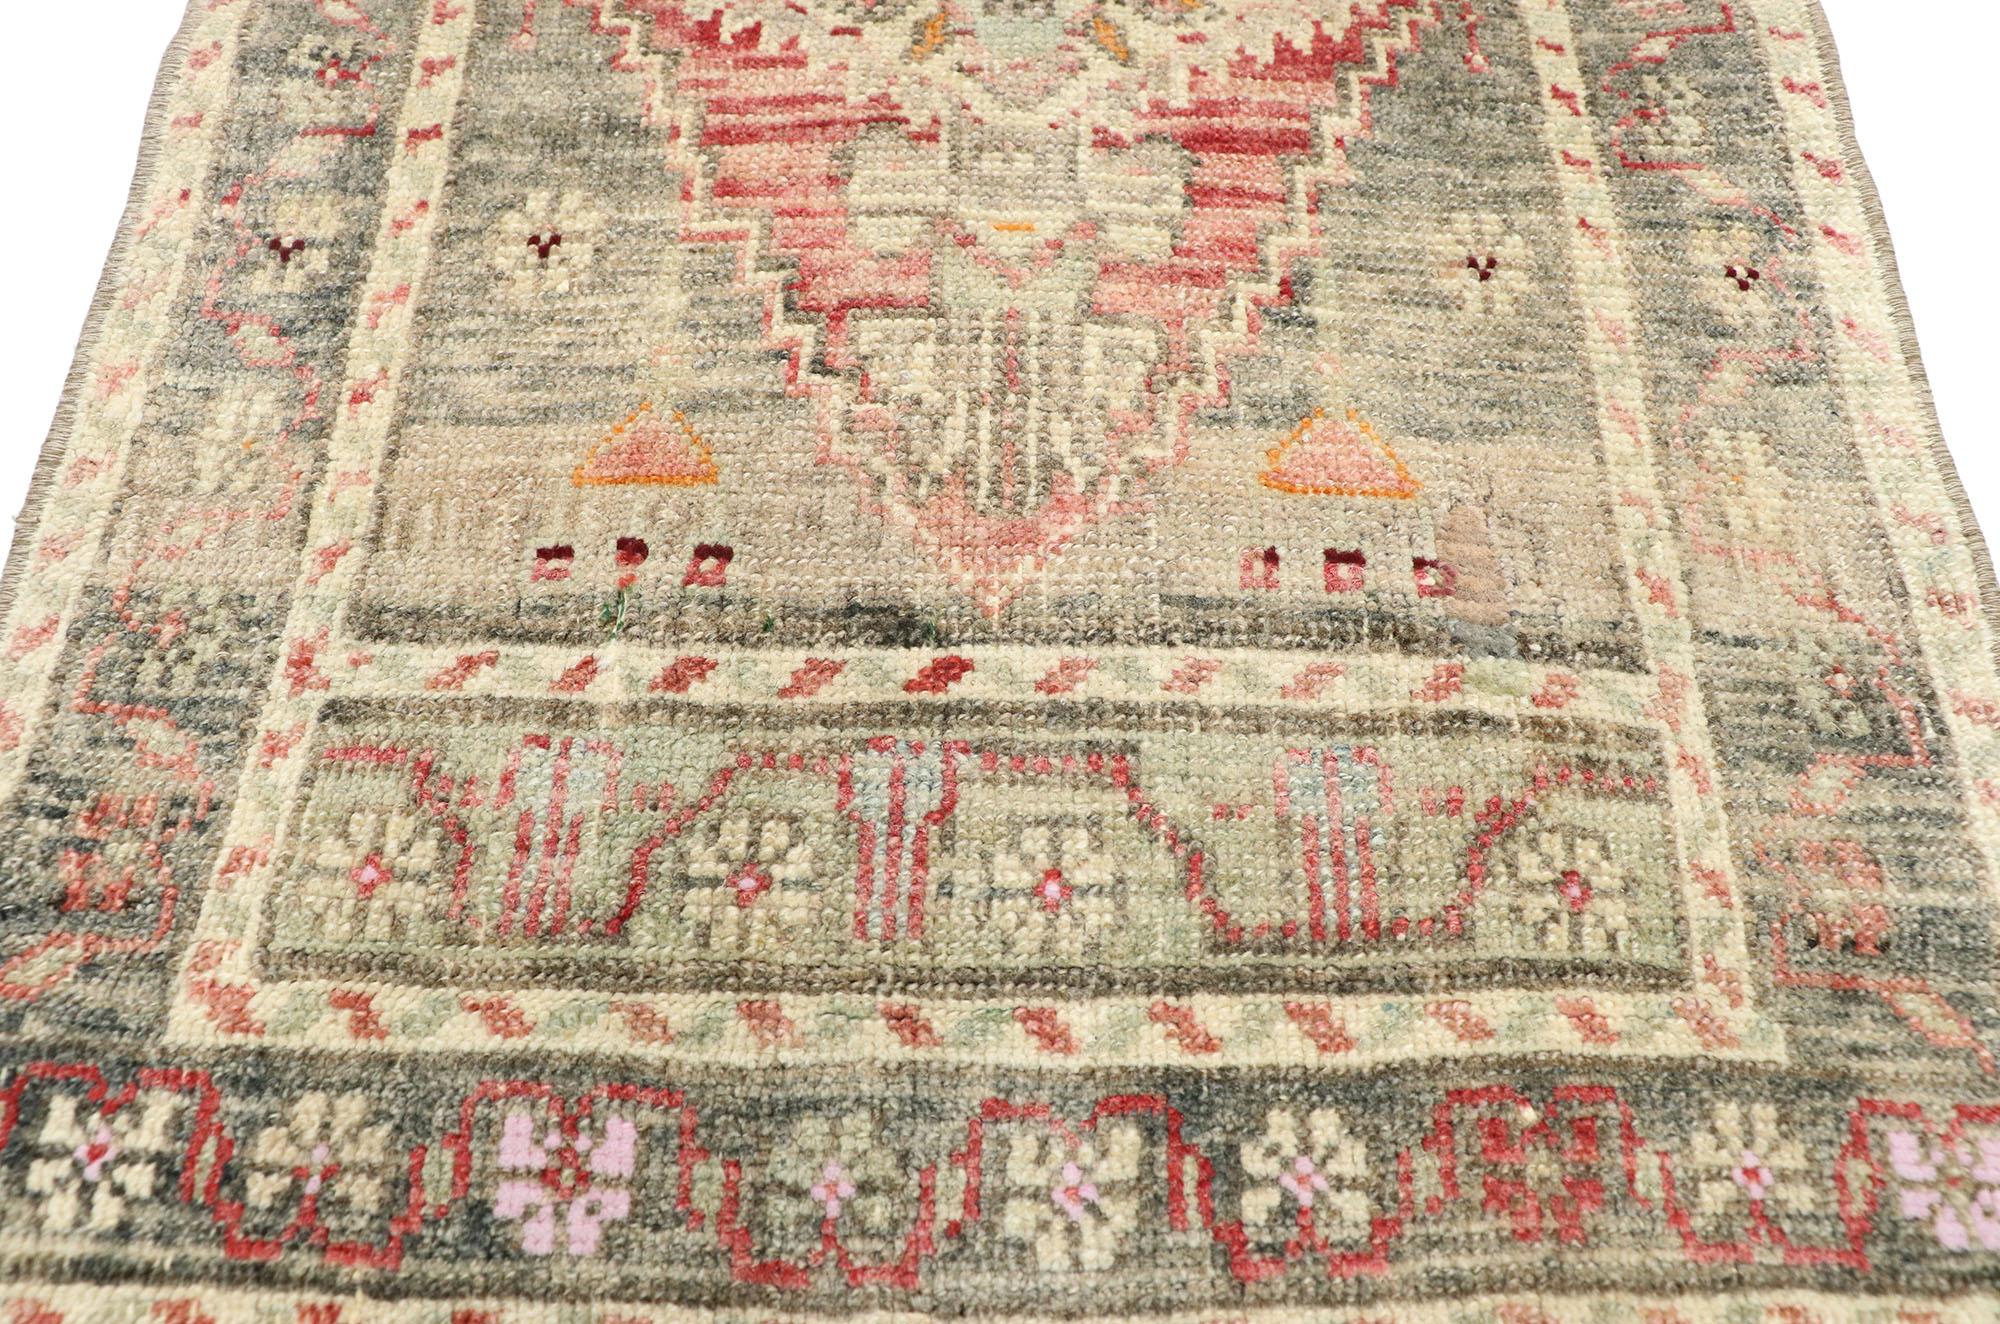 Vintage Turkish Oushak Yastik Rug with Rustic Industrial Style, Scatter Rug In Good Condition For Sale In Dallas, TX